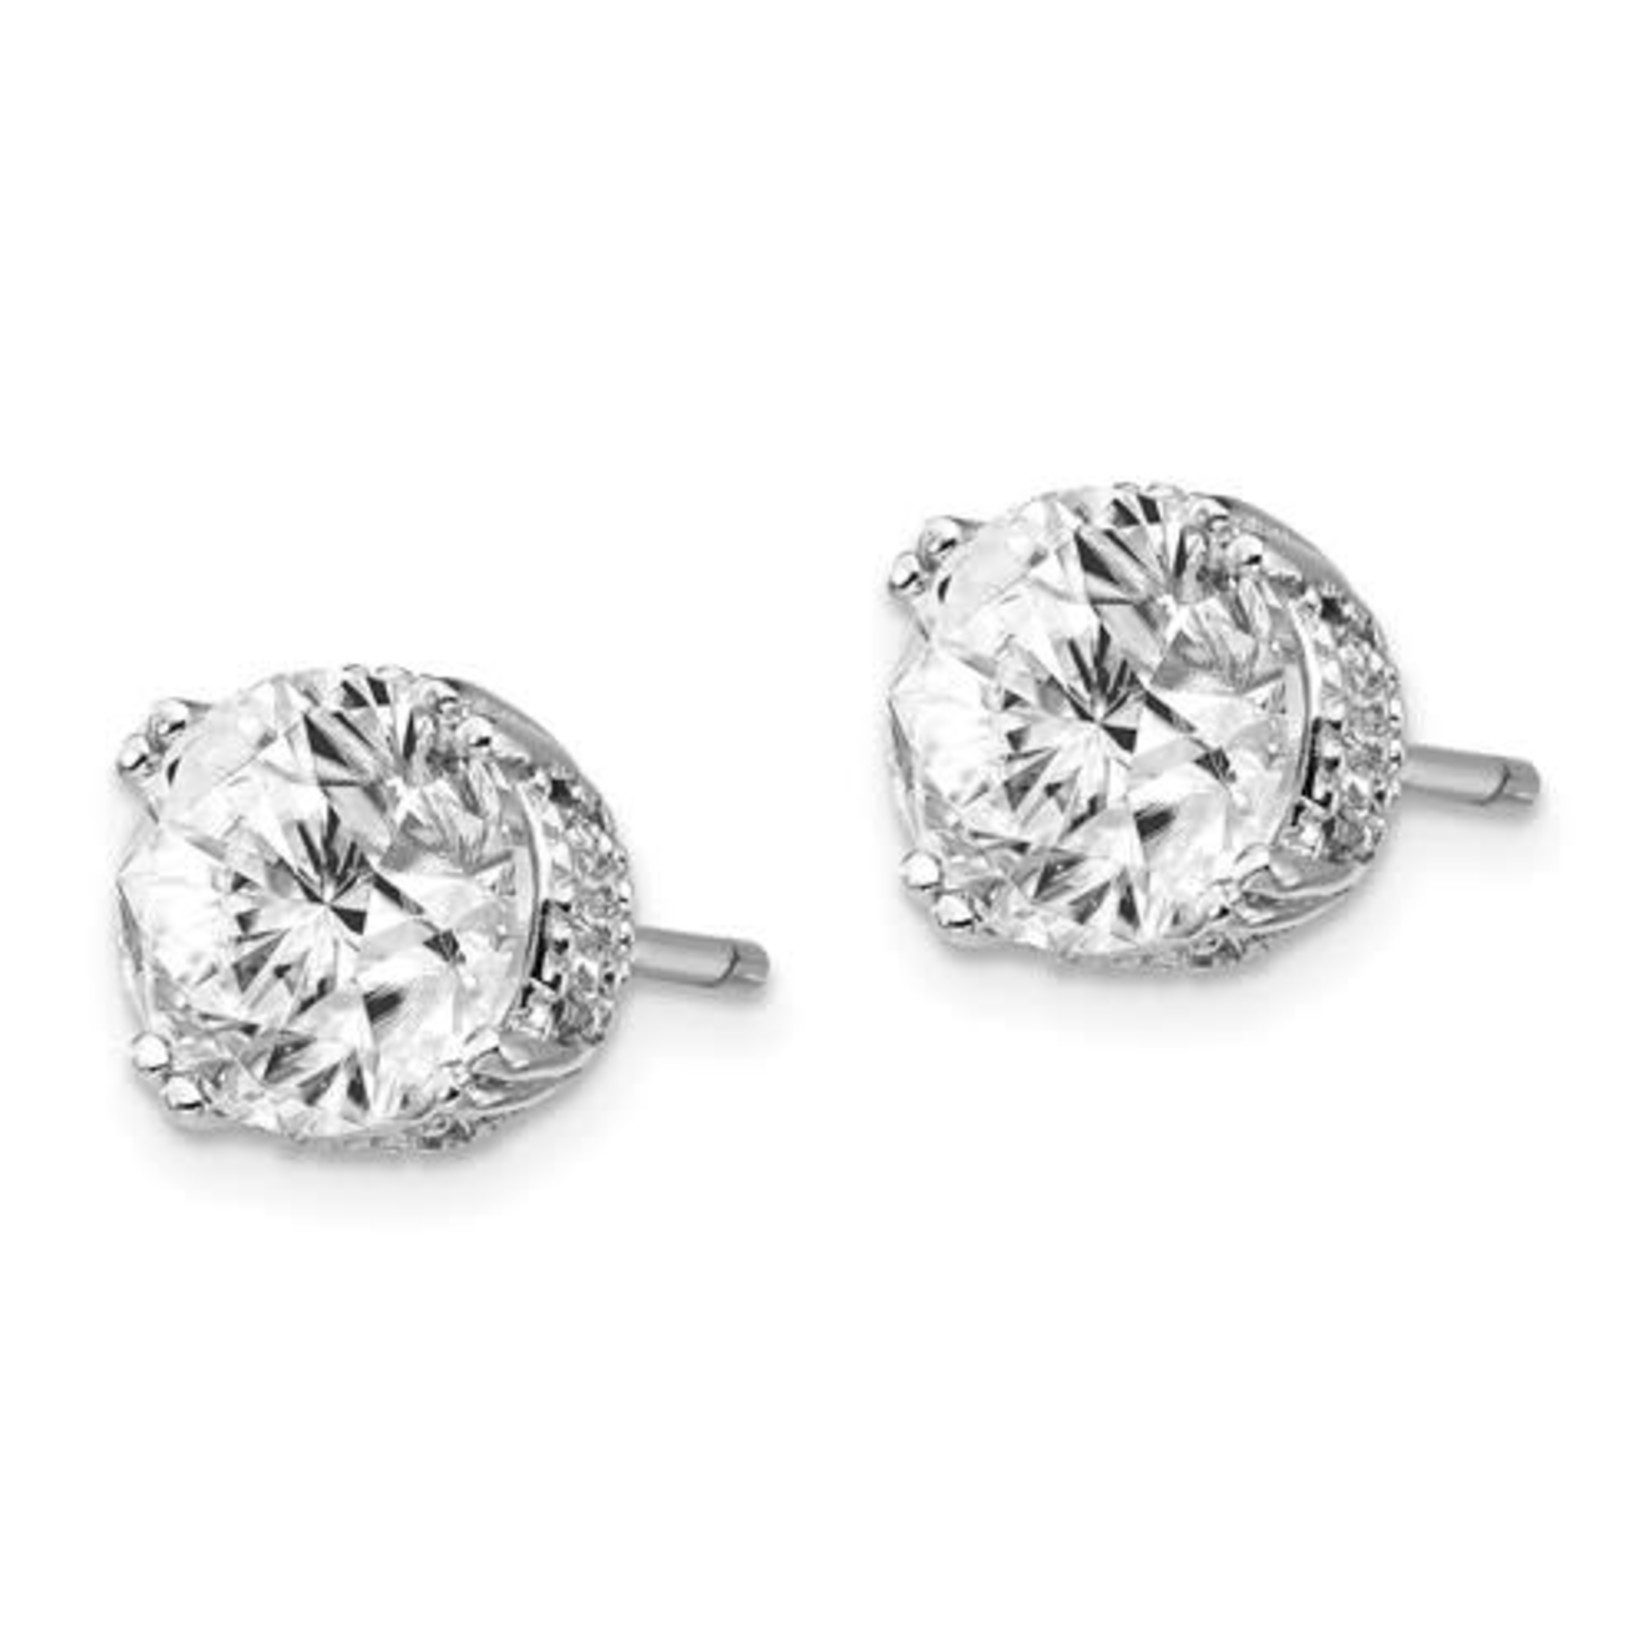 This Is Life Crown Jewels Sterling Silver Cz Earrings